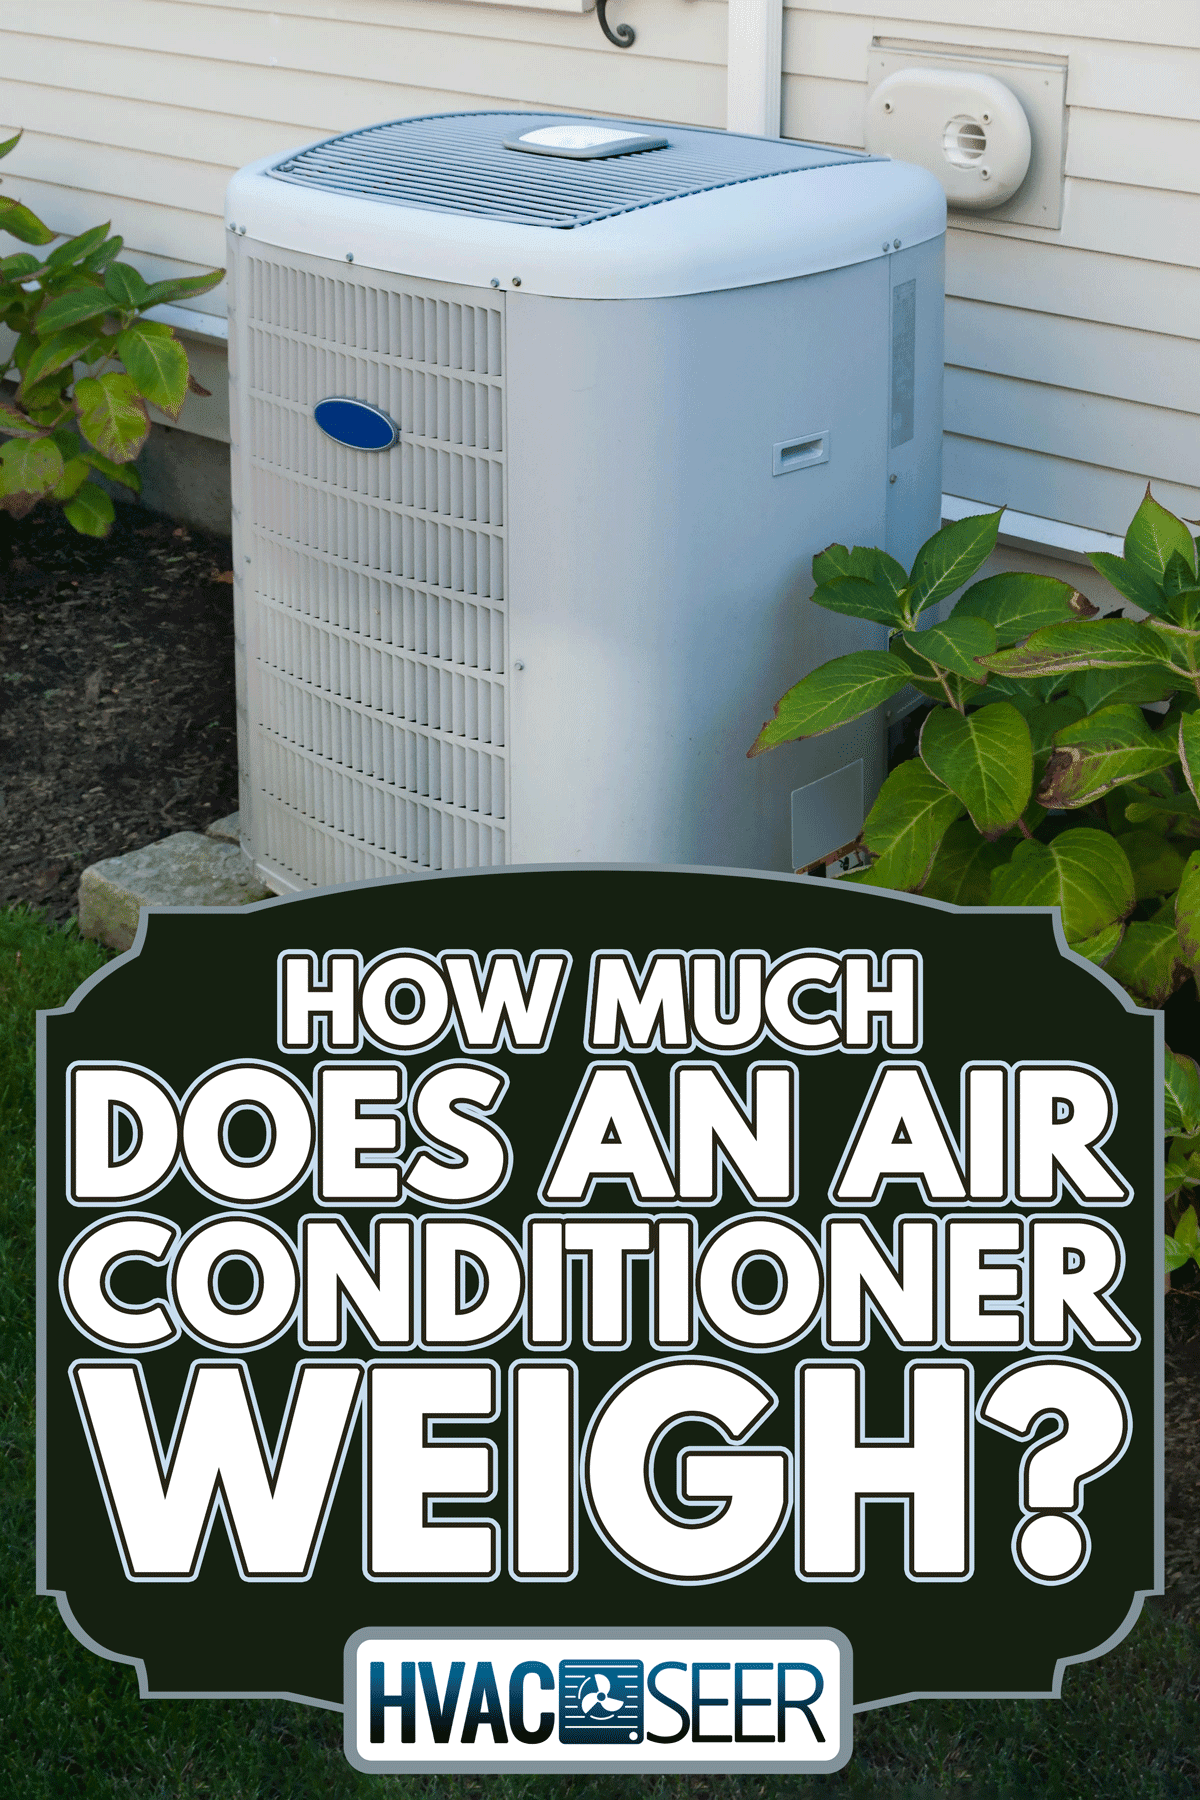 Heating and air conditioning inverter on the side of a house, How Much Does An Air Conditioner Weigh?